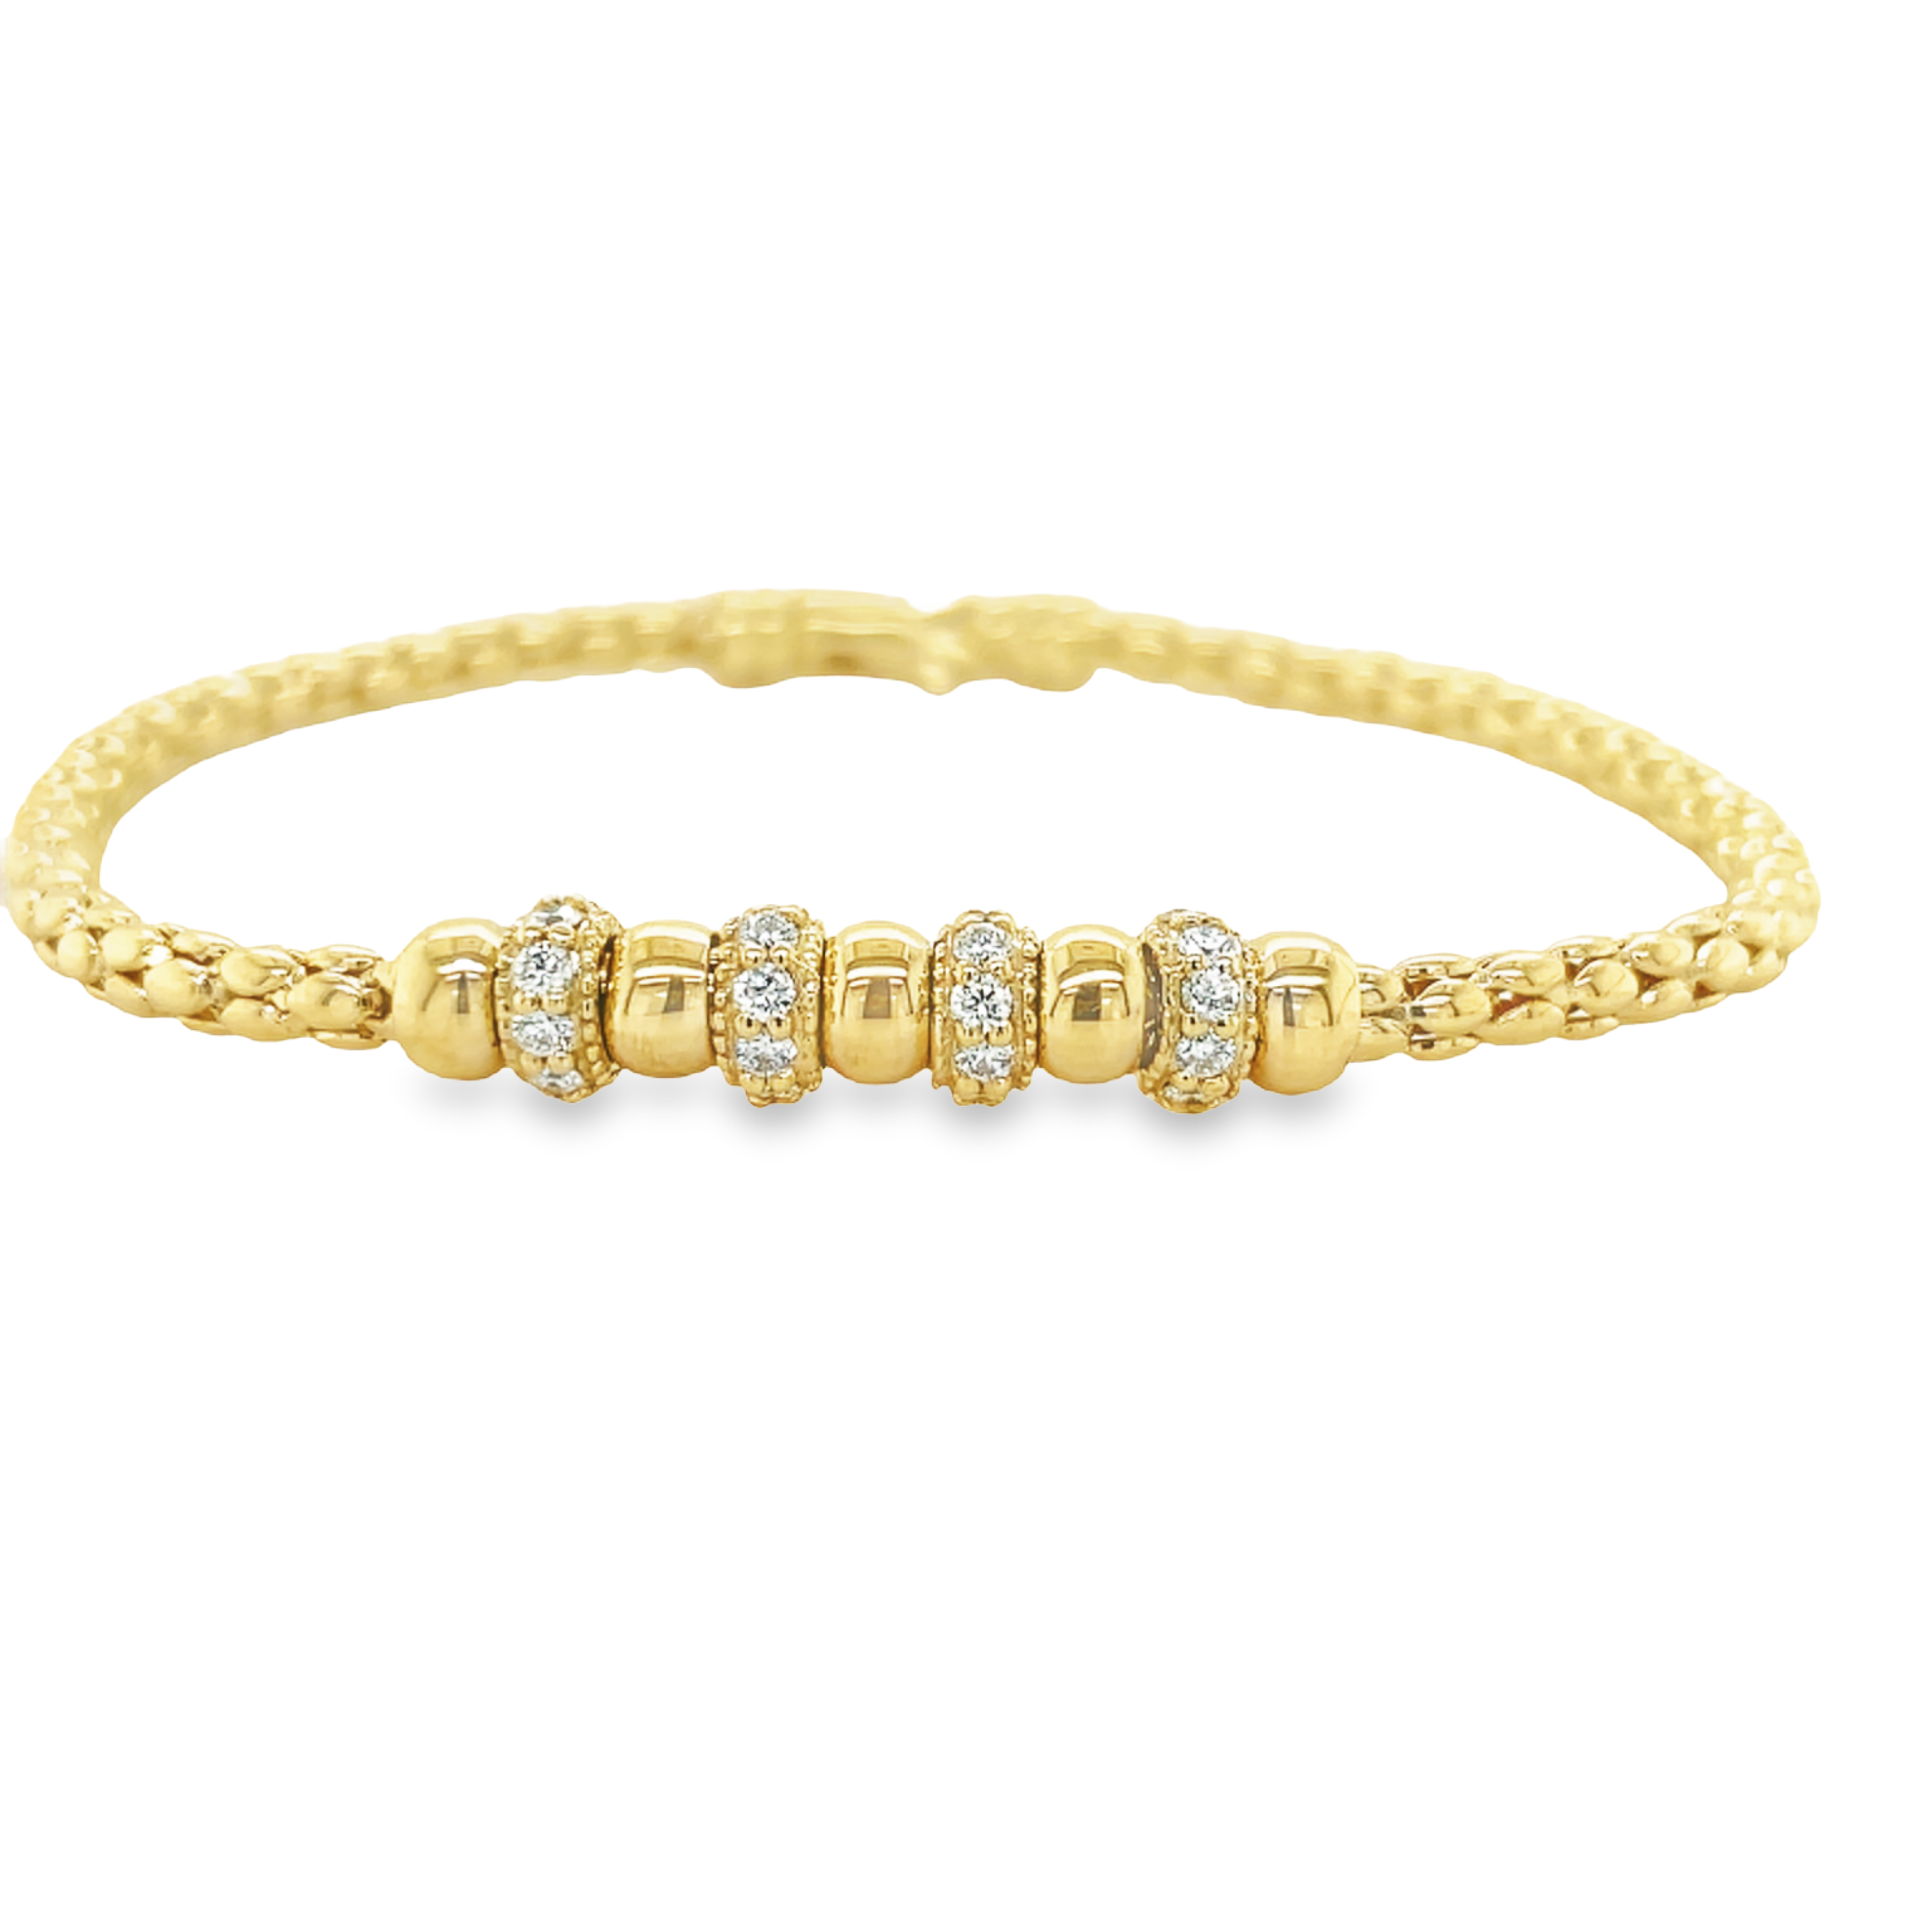 Treat yourself to this gorgeous 14 kt yellow gold Bead & Diamond Bracelet. Eye-catching 4 gold rondelles and 4 diamond rondelles (0.63 cts) make up the dazzling design. With the lobster and popcorn link closure, you can be sure to enjoy a sophisticated and secure piece!